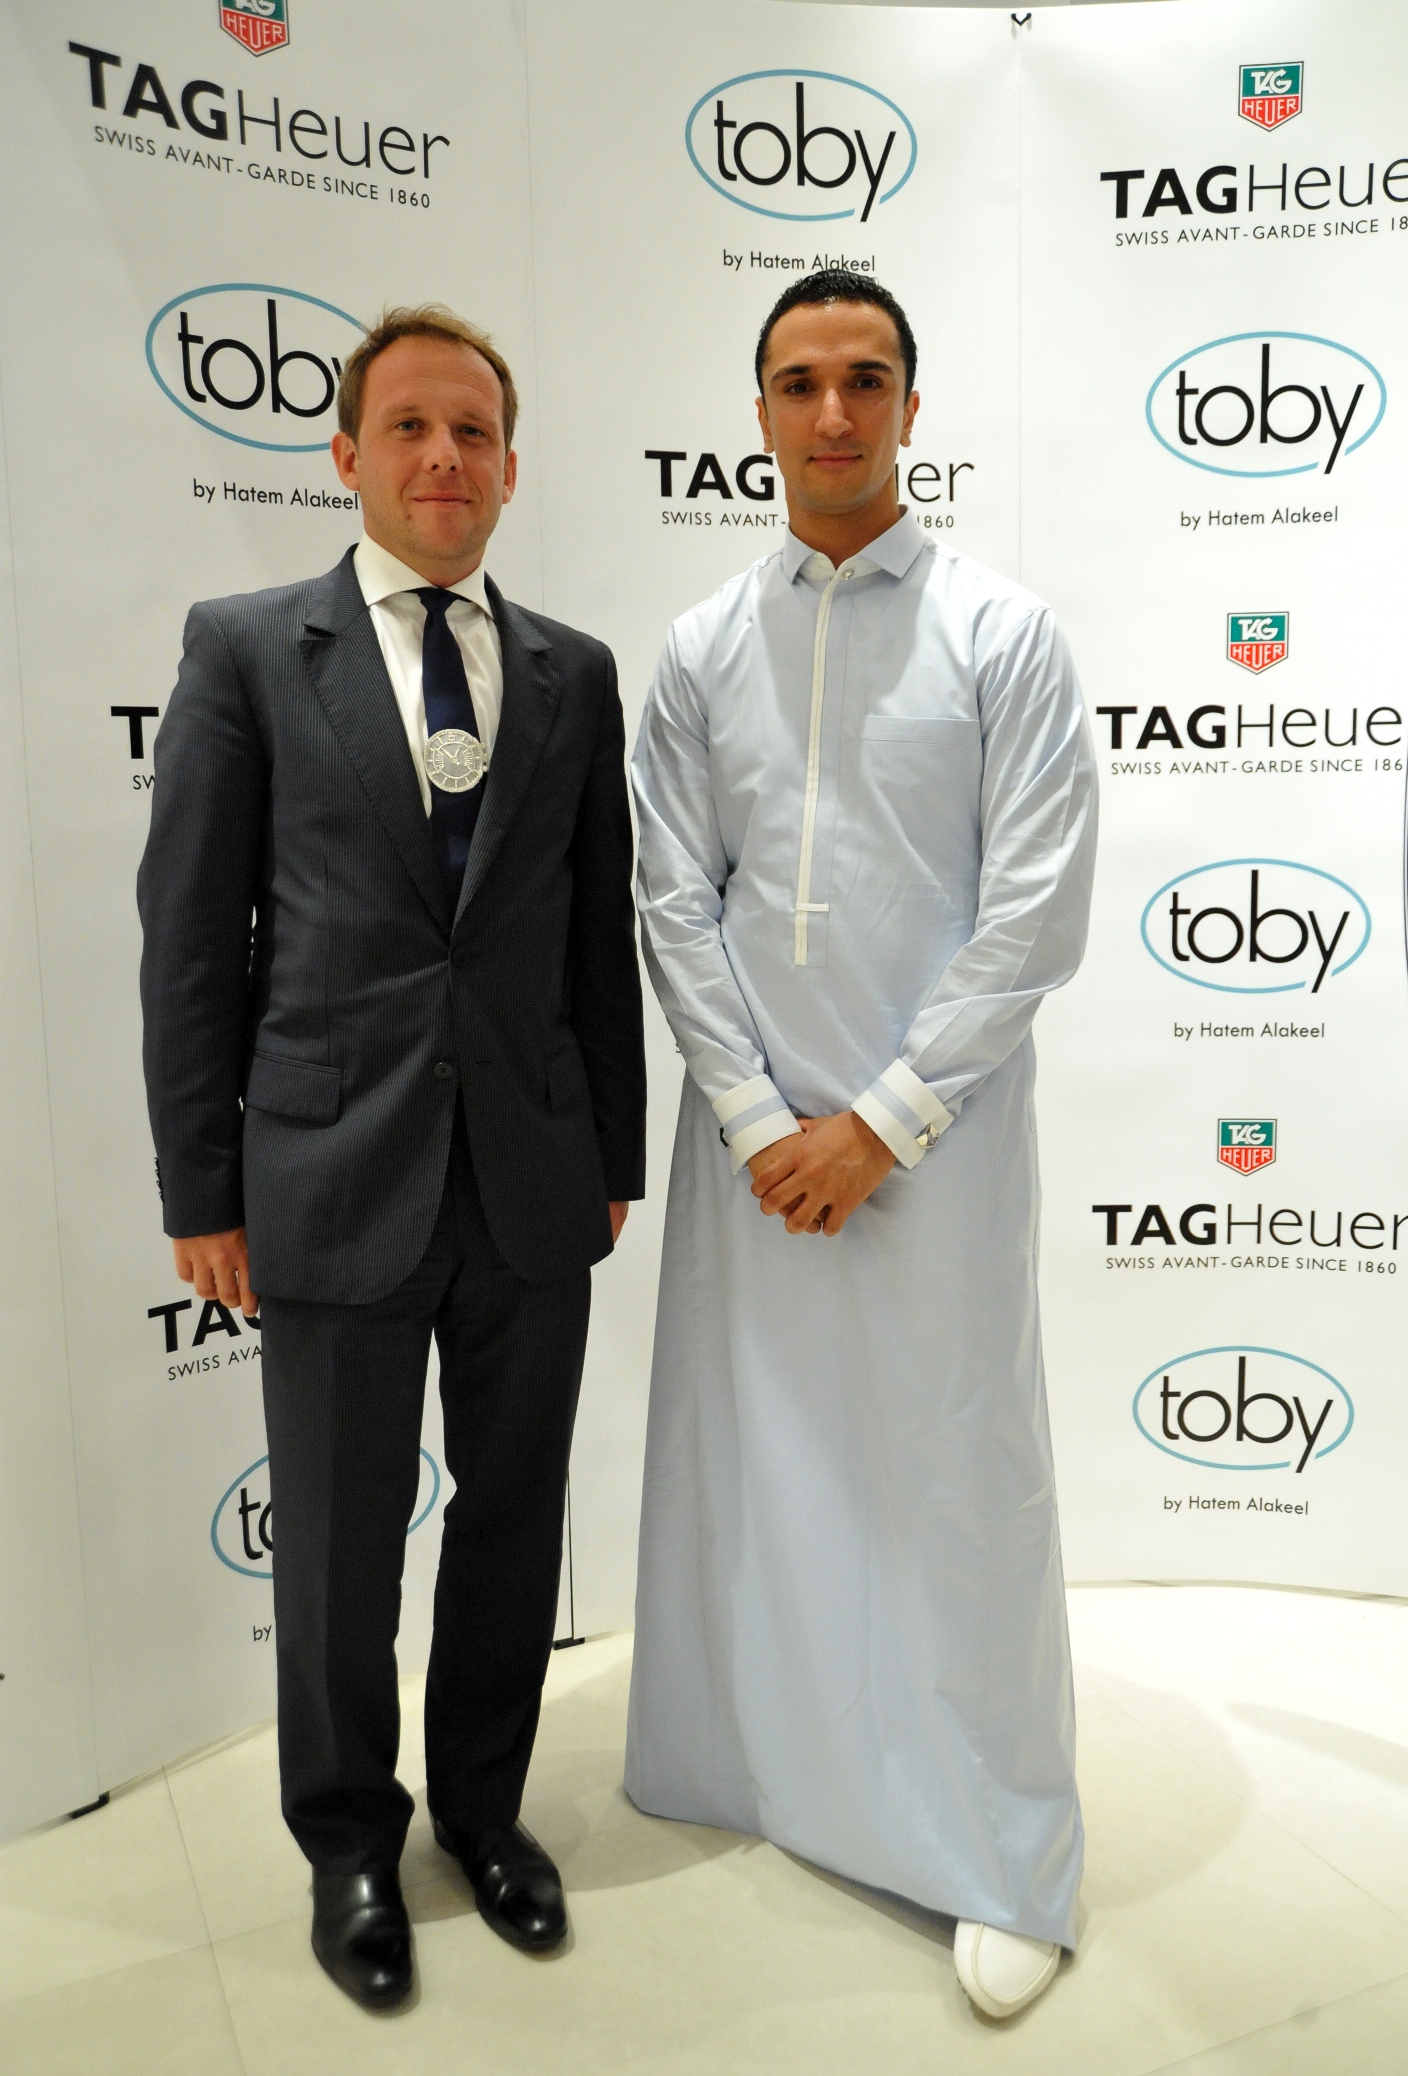 Kolia Neveux- Area Manager at TAG Heuer with Hatem Alakeel- designer of the Toby line of thobes